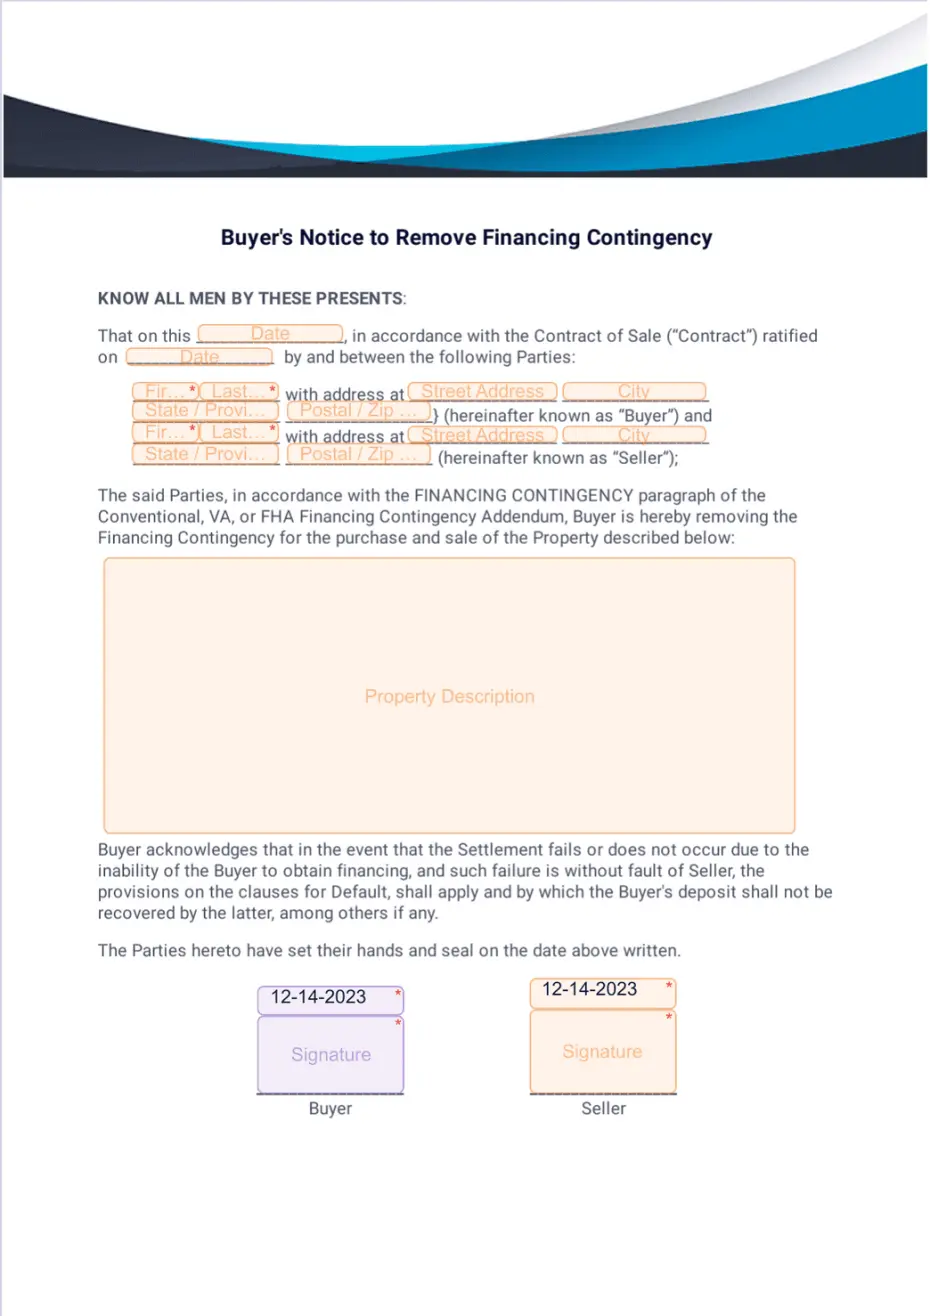 Buyers Notice to Remove Financing Contingency Template